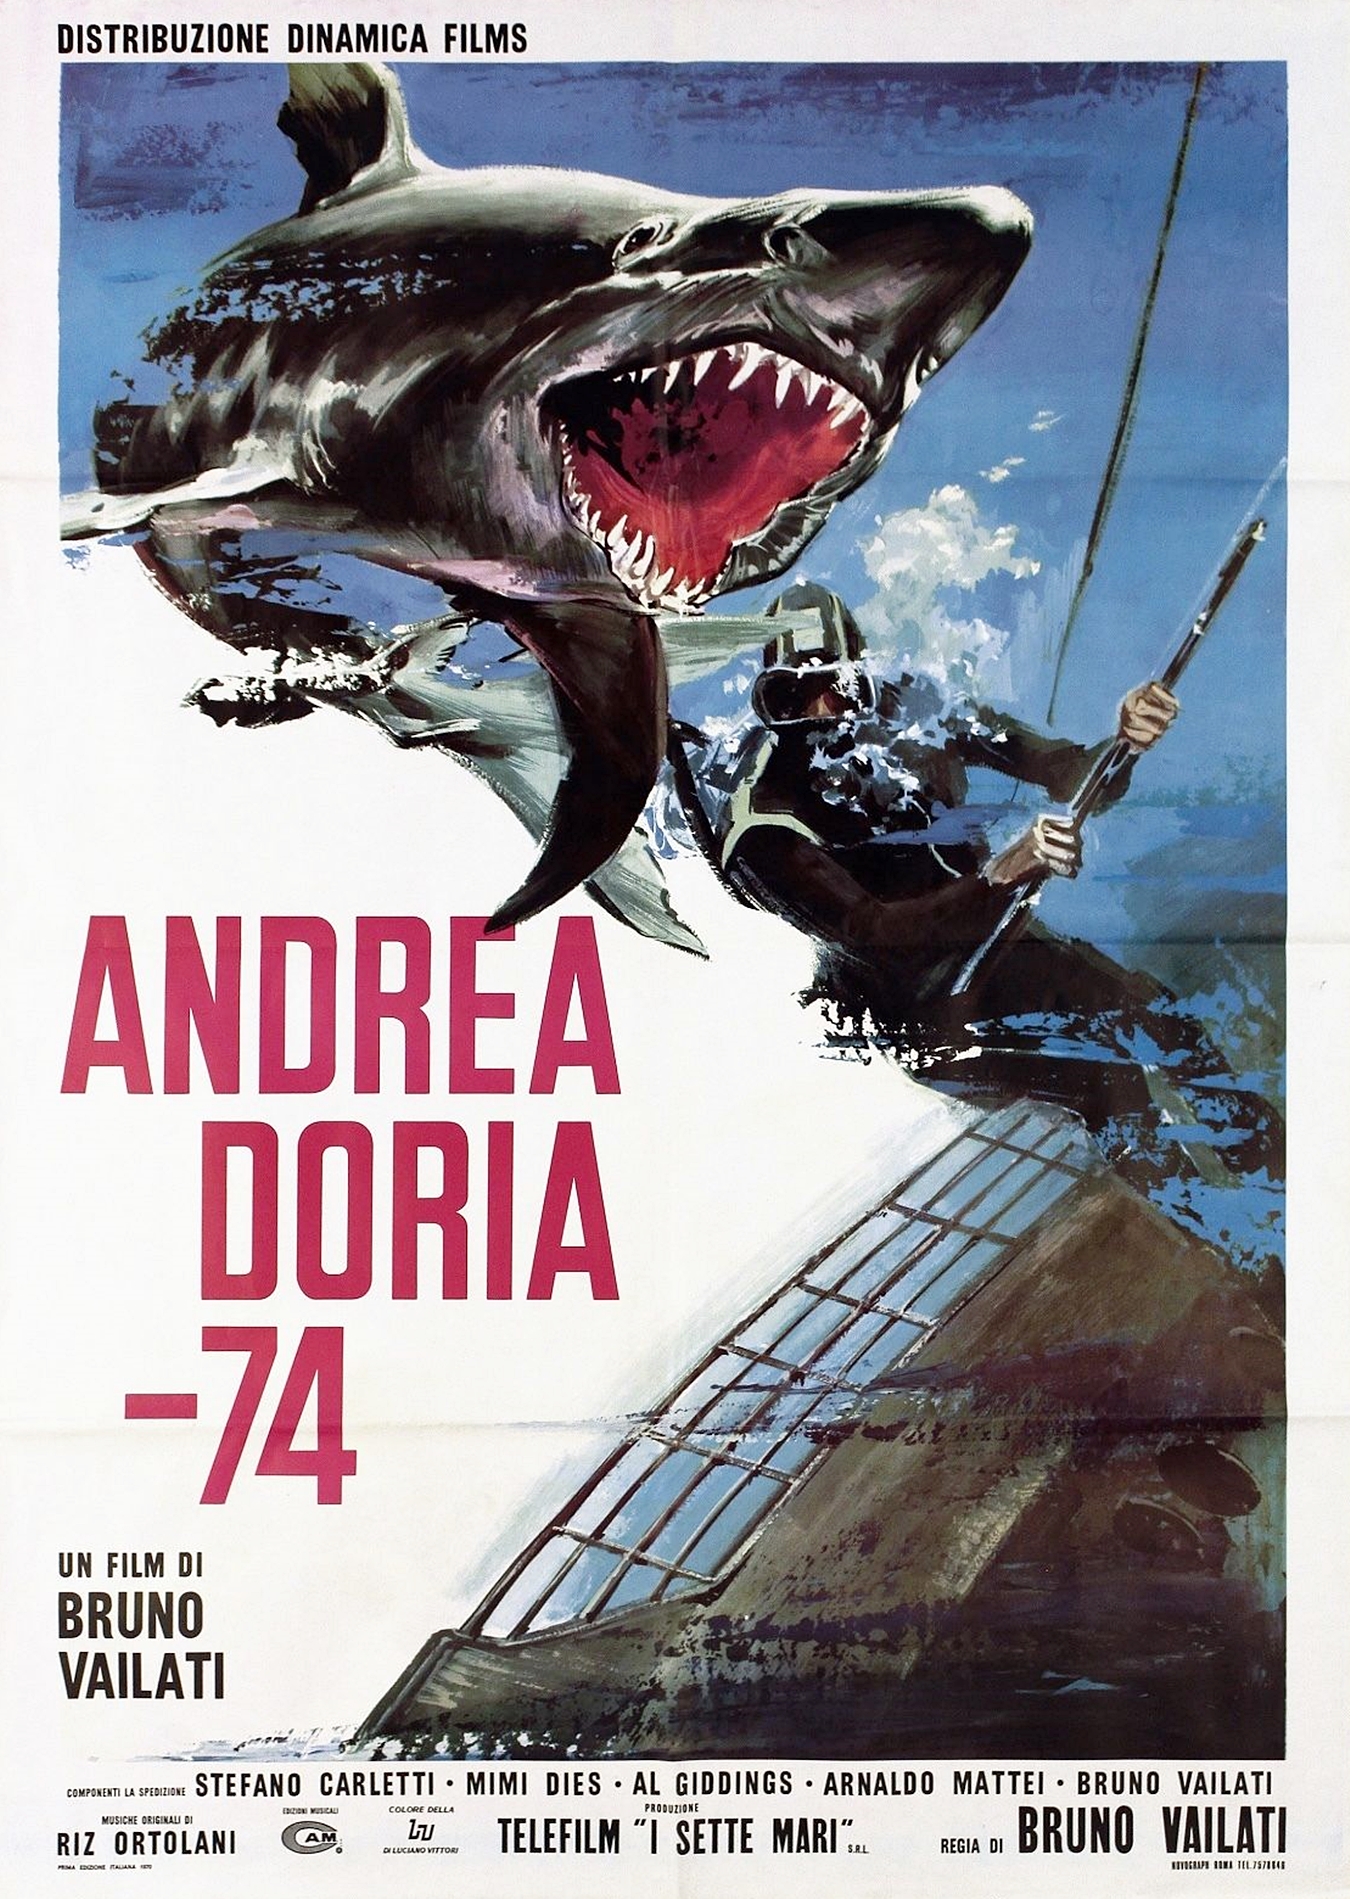 Andrea Doria -74 (1970) with English Subtitles on DVD on DVD